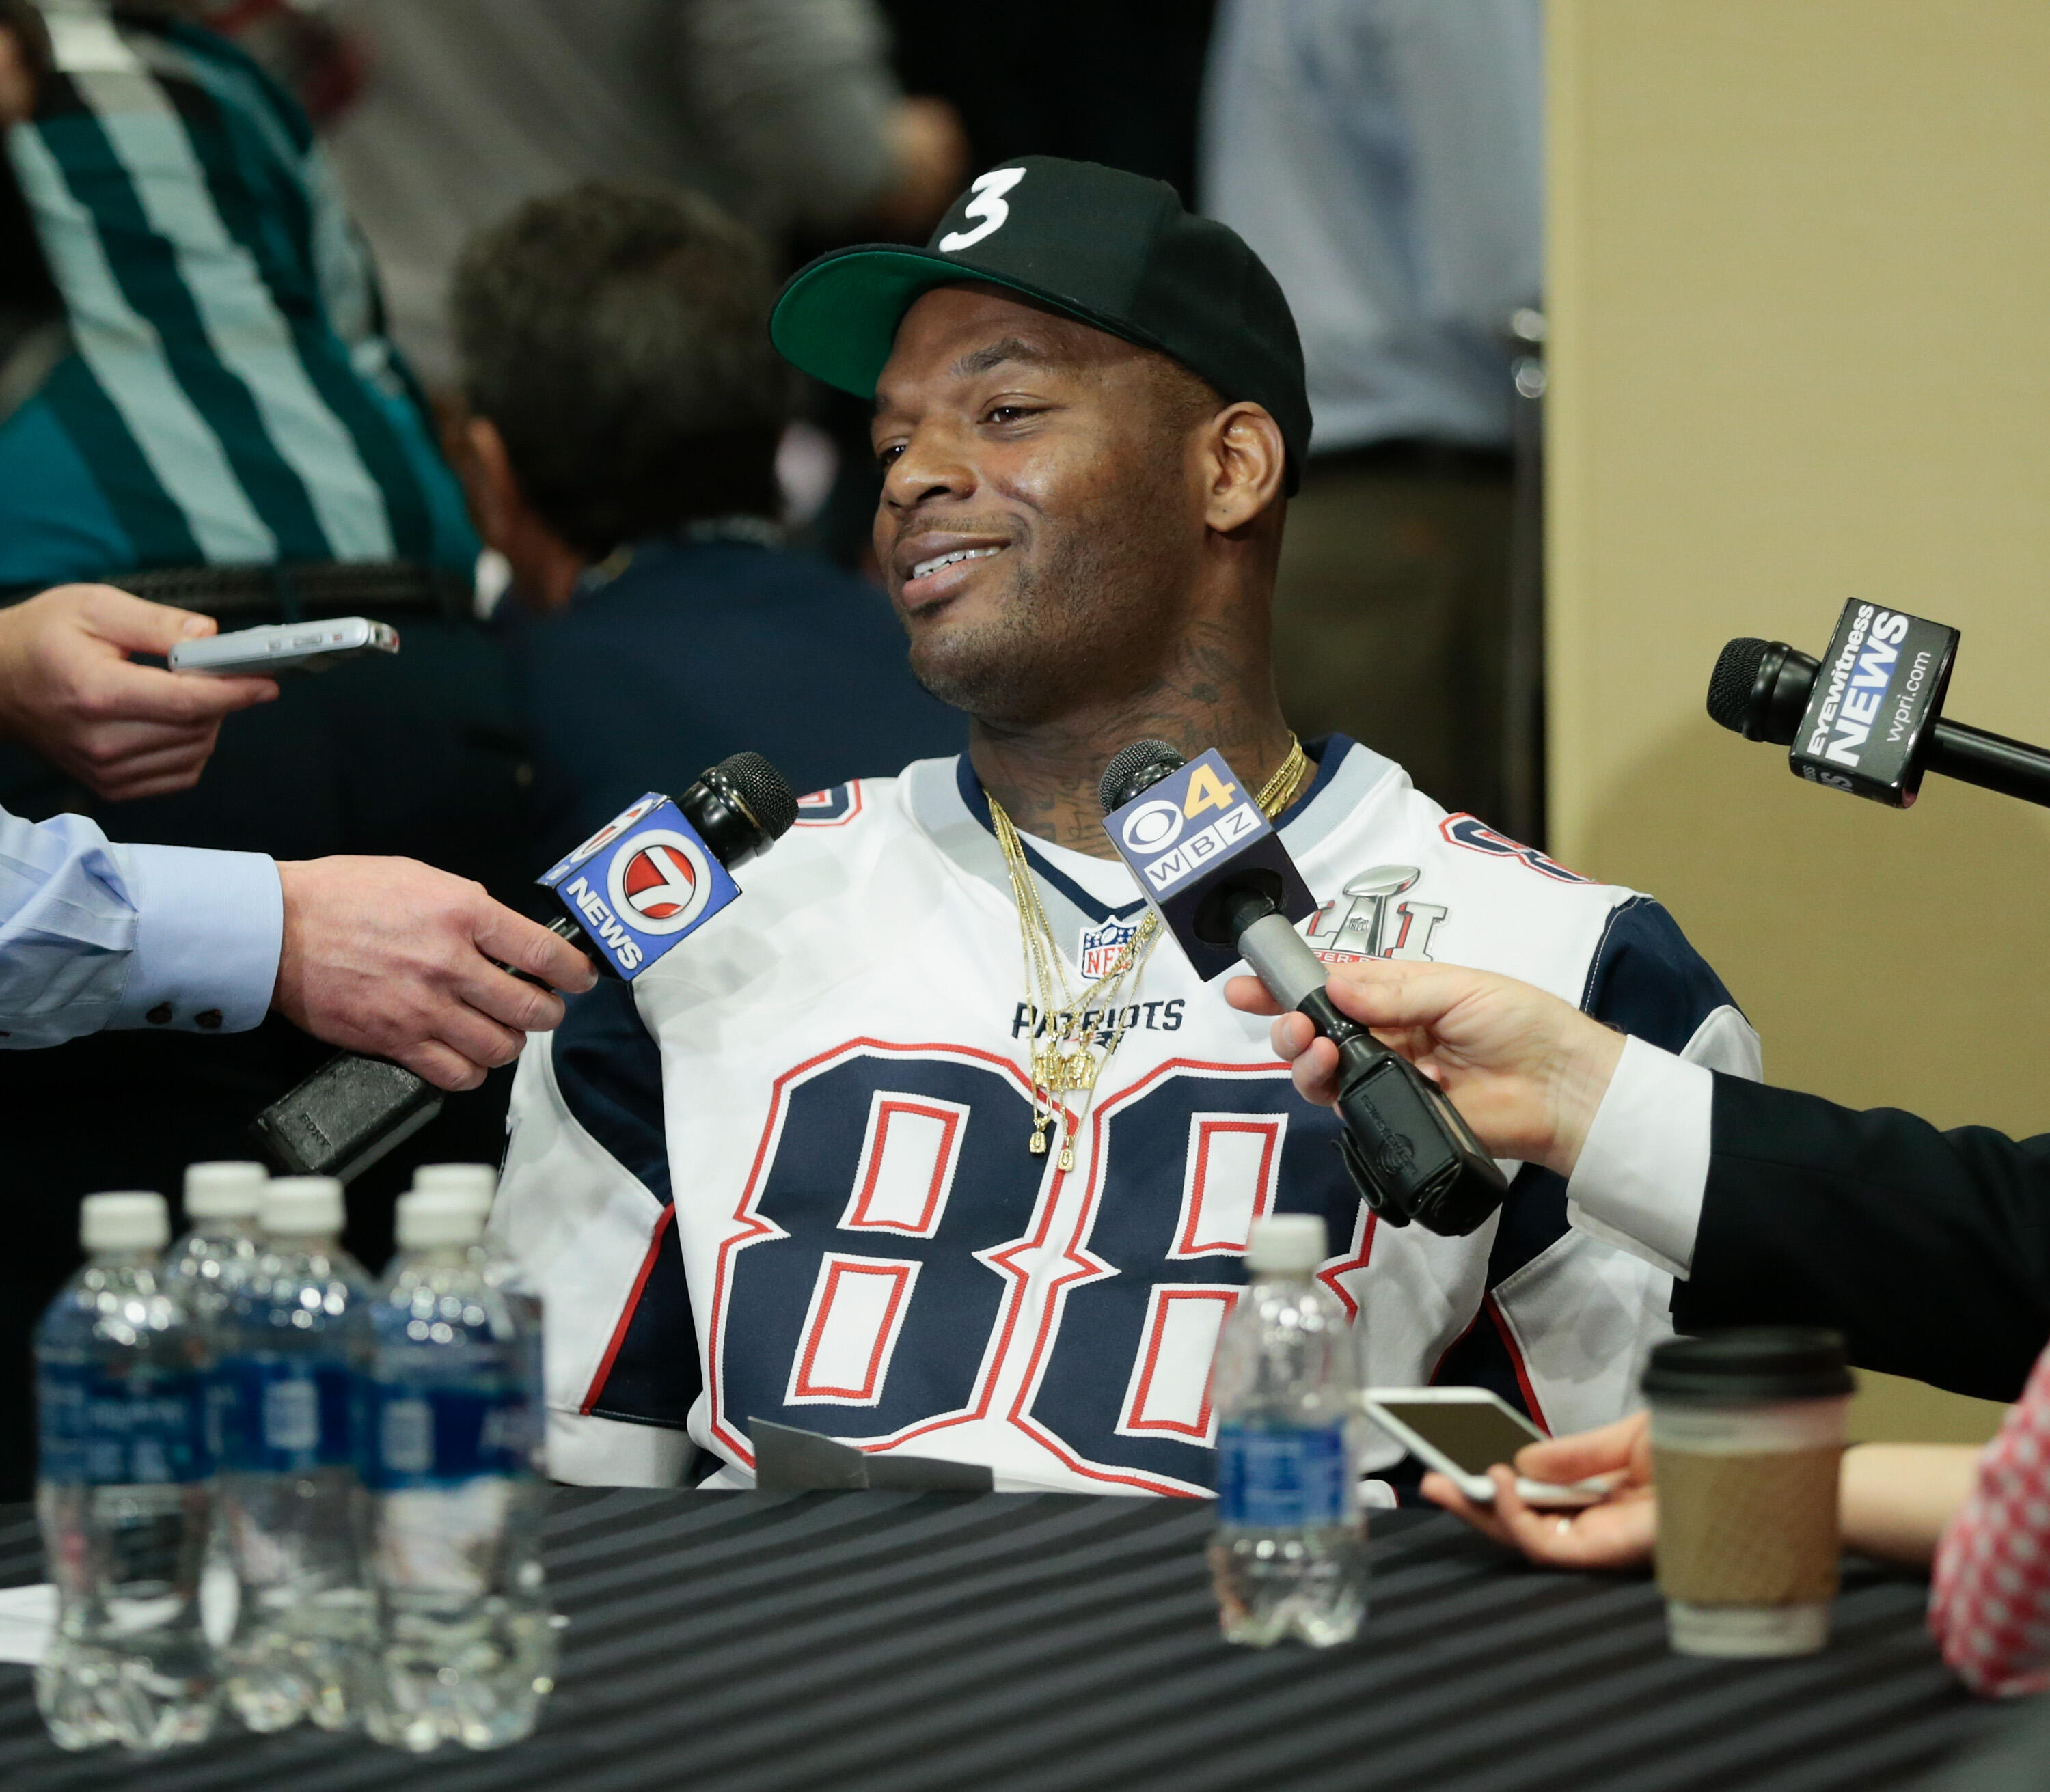 HOUSTON, TX - FEBRUARY 02:  Martellus Bennett #88 of the New England Patriots answers questions during Super Bowl LI media availability at the J.W. Marriott on February 2, 2017 in Houston, Texas.  (Photo by Bob Levey/Getty Images)